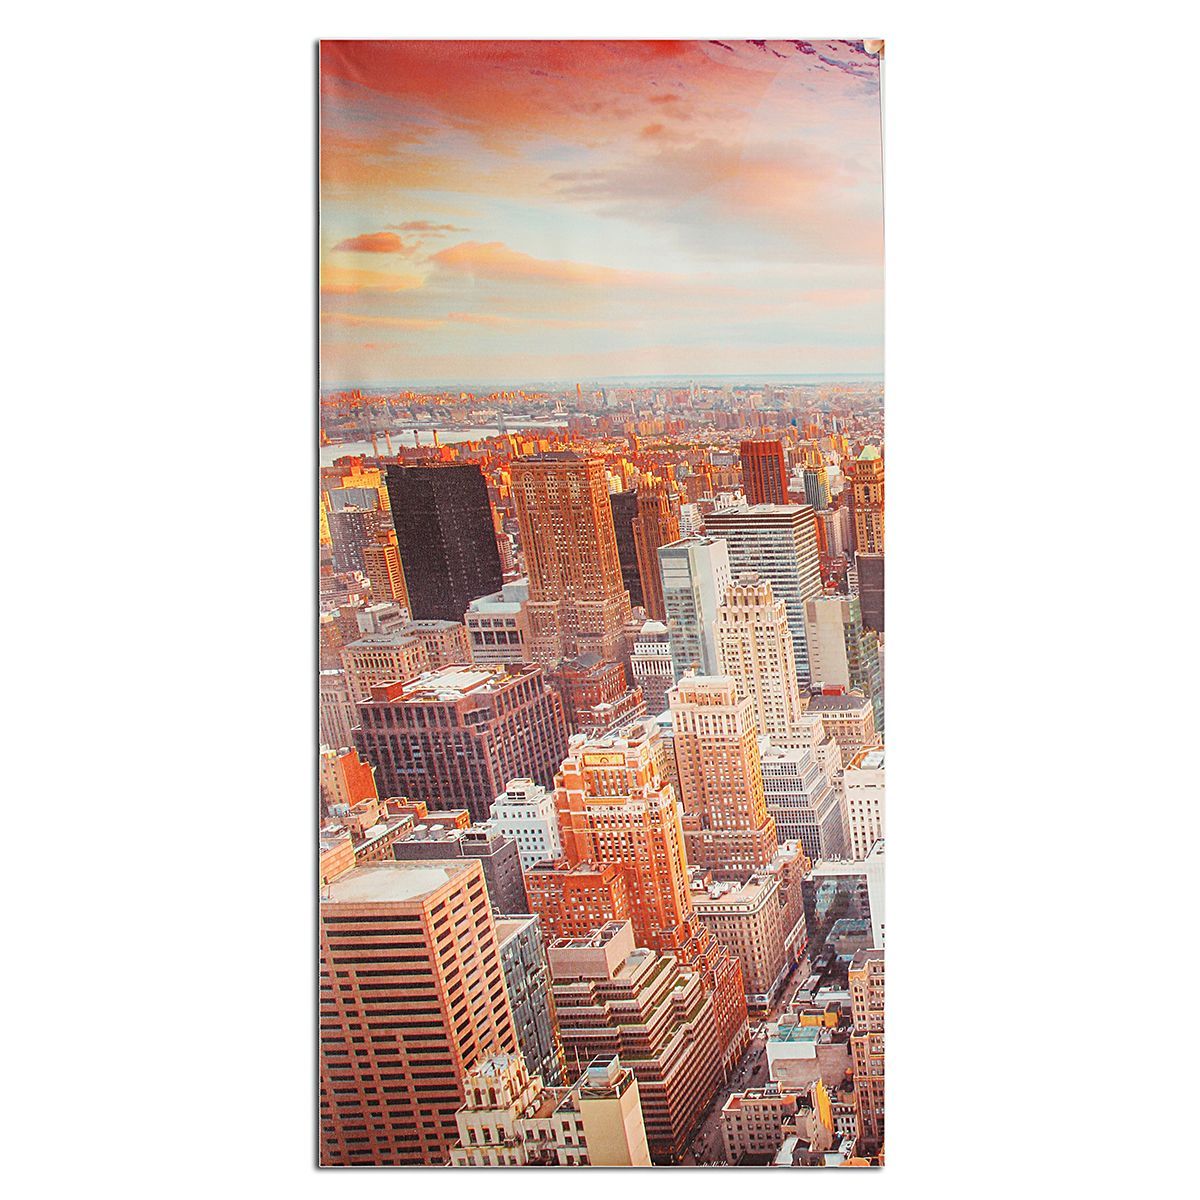 New-York-City-Canvas-Print-Painting-Picture-Wall-Art-Decorations-Landscape-Unframed-1155392